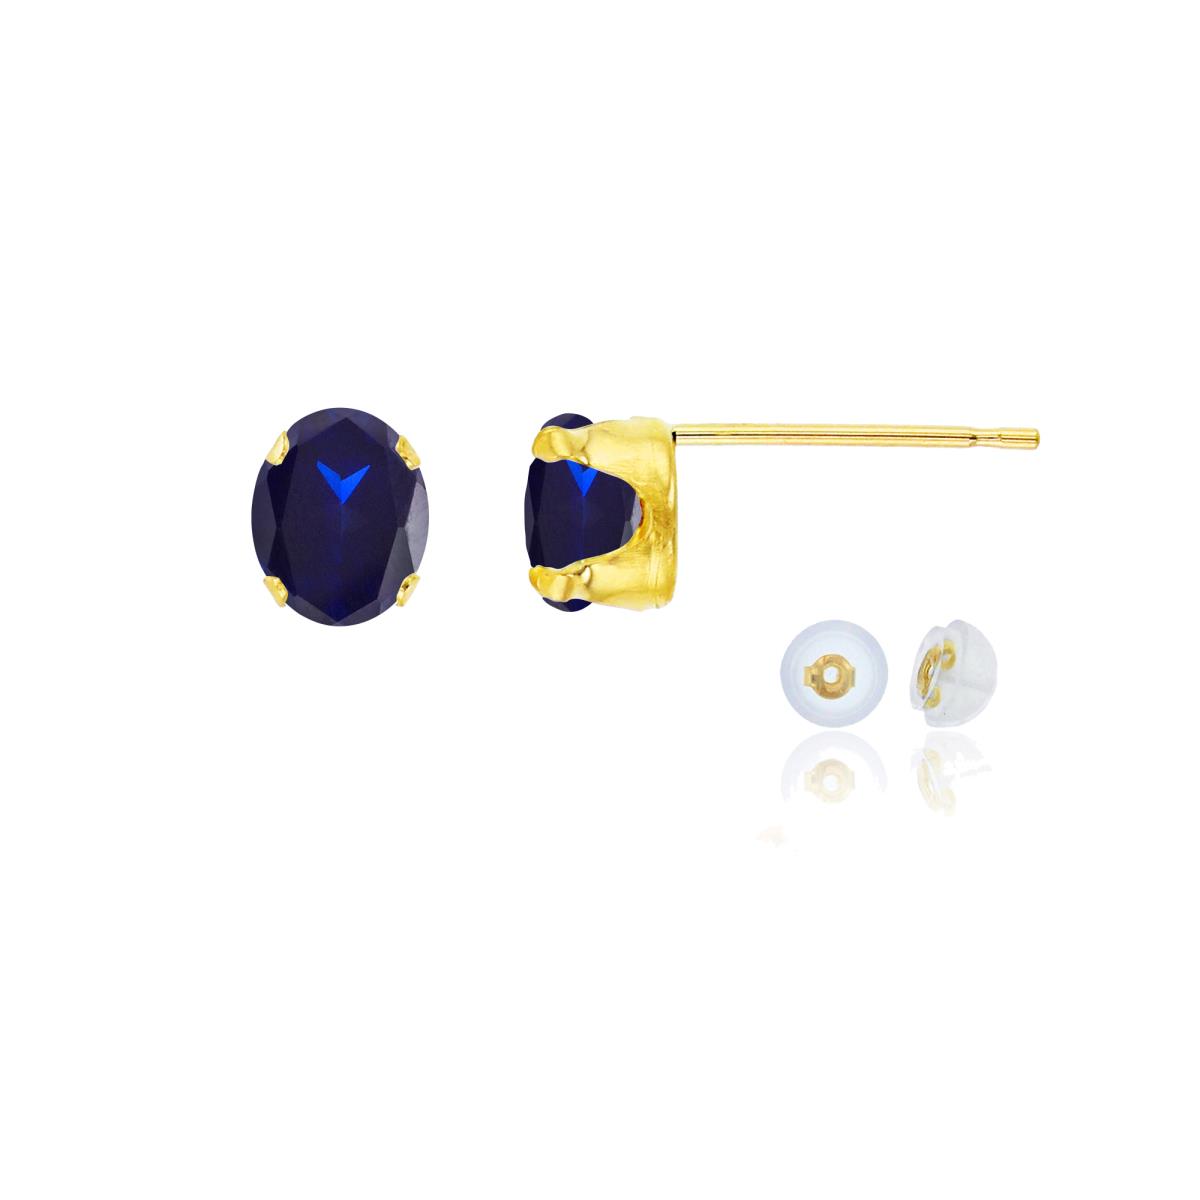 10K Yellow Gold 6x4mm Oval Cr Blue Sapphire Stud Earring with Silicone Back